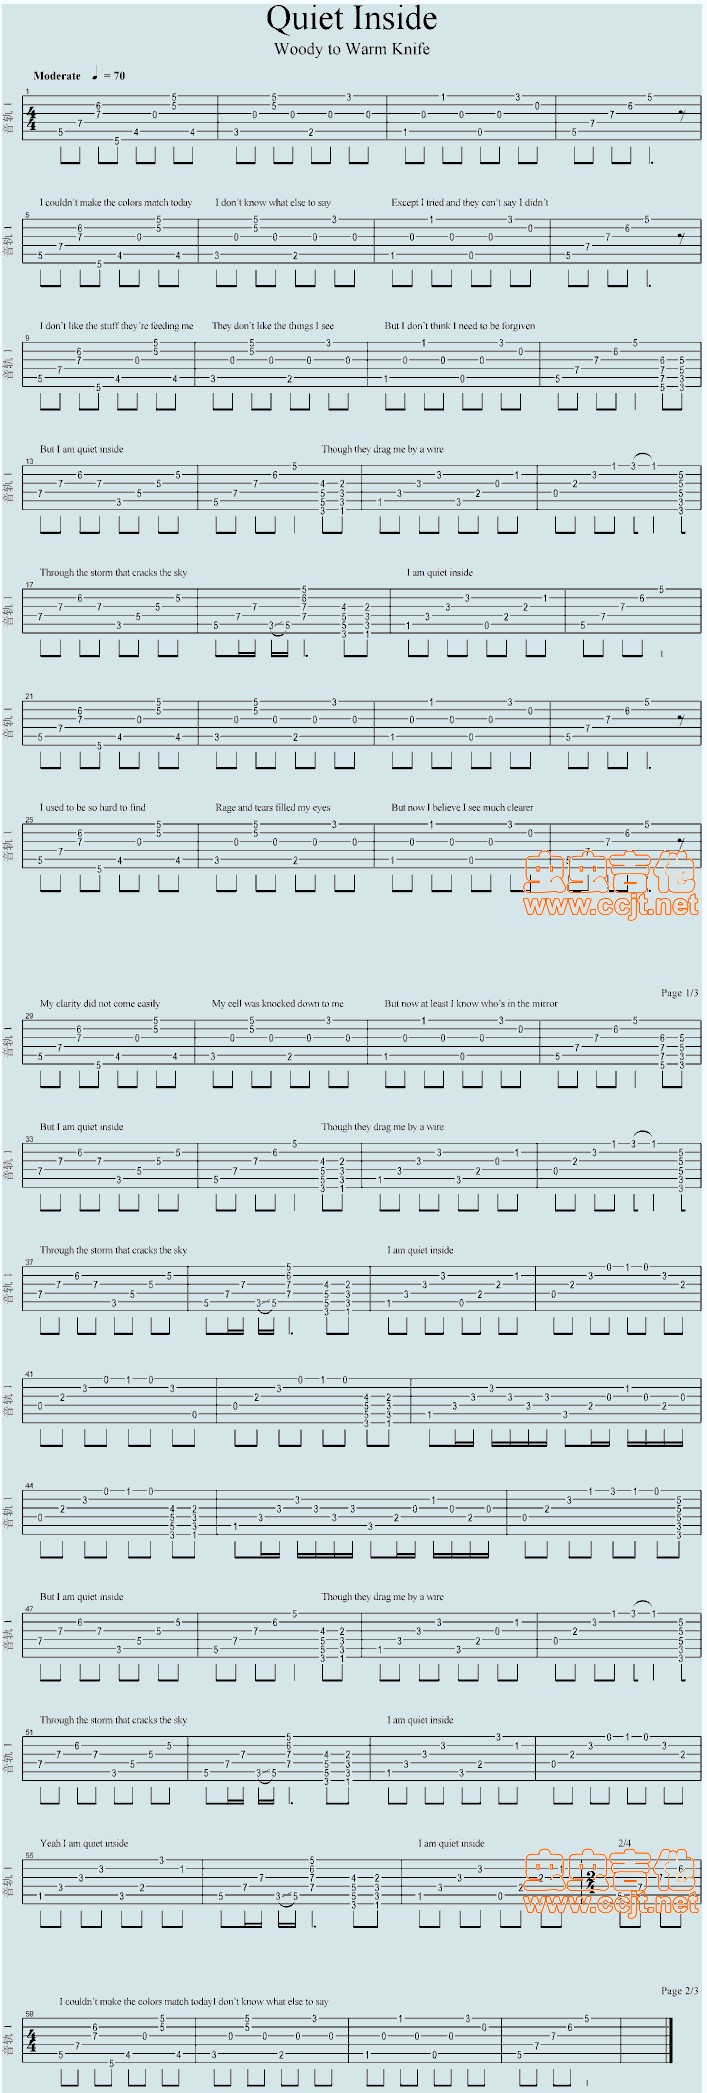 quiet inside by Andy Tubman Guitar Sheet Music Free